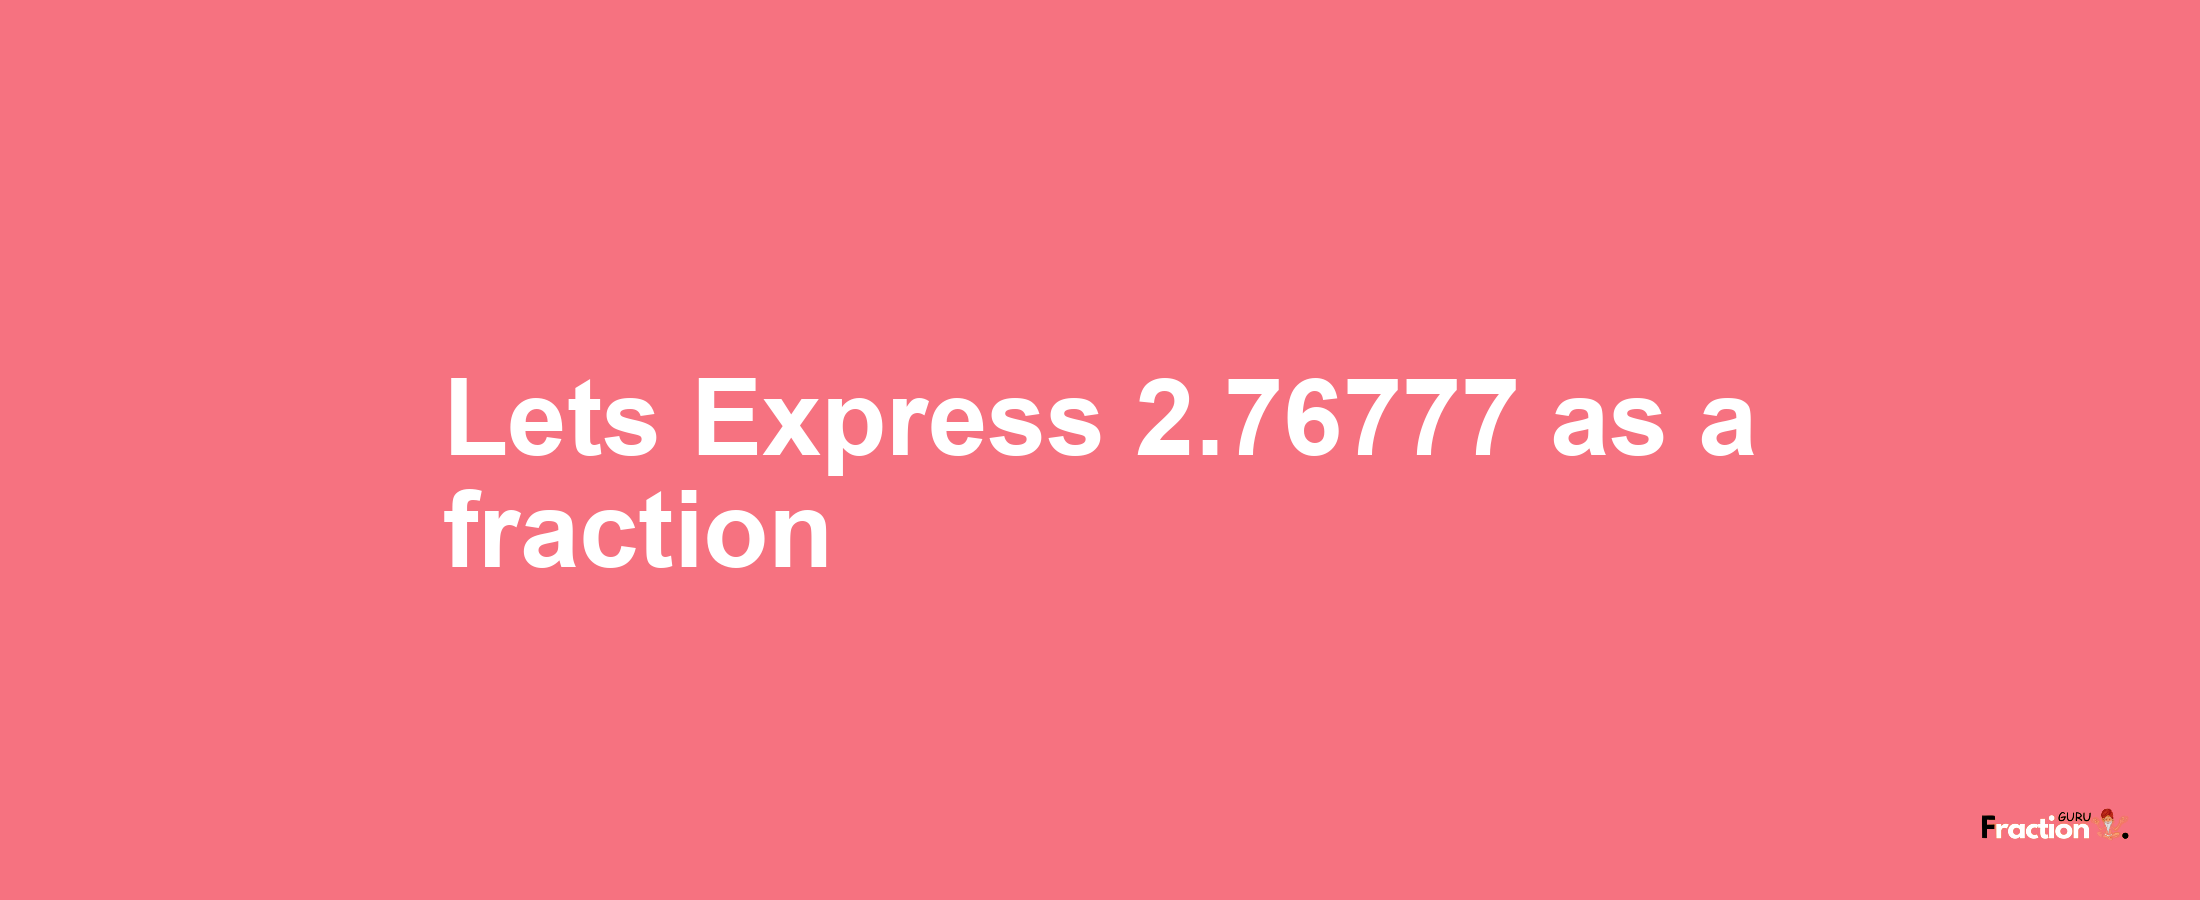 Lets Express 2.76777 as afraction